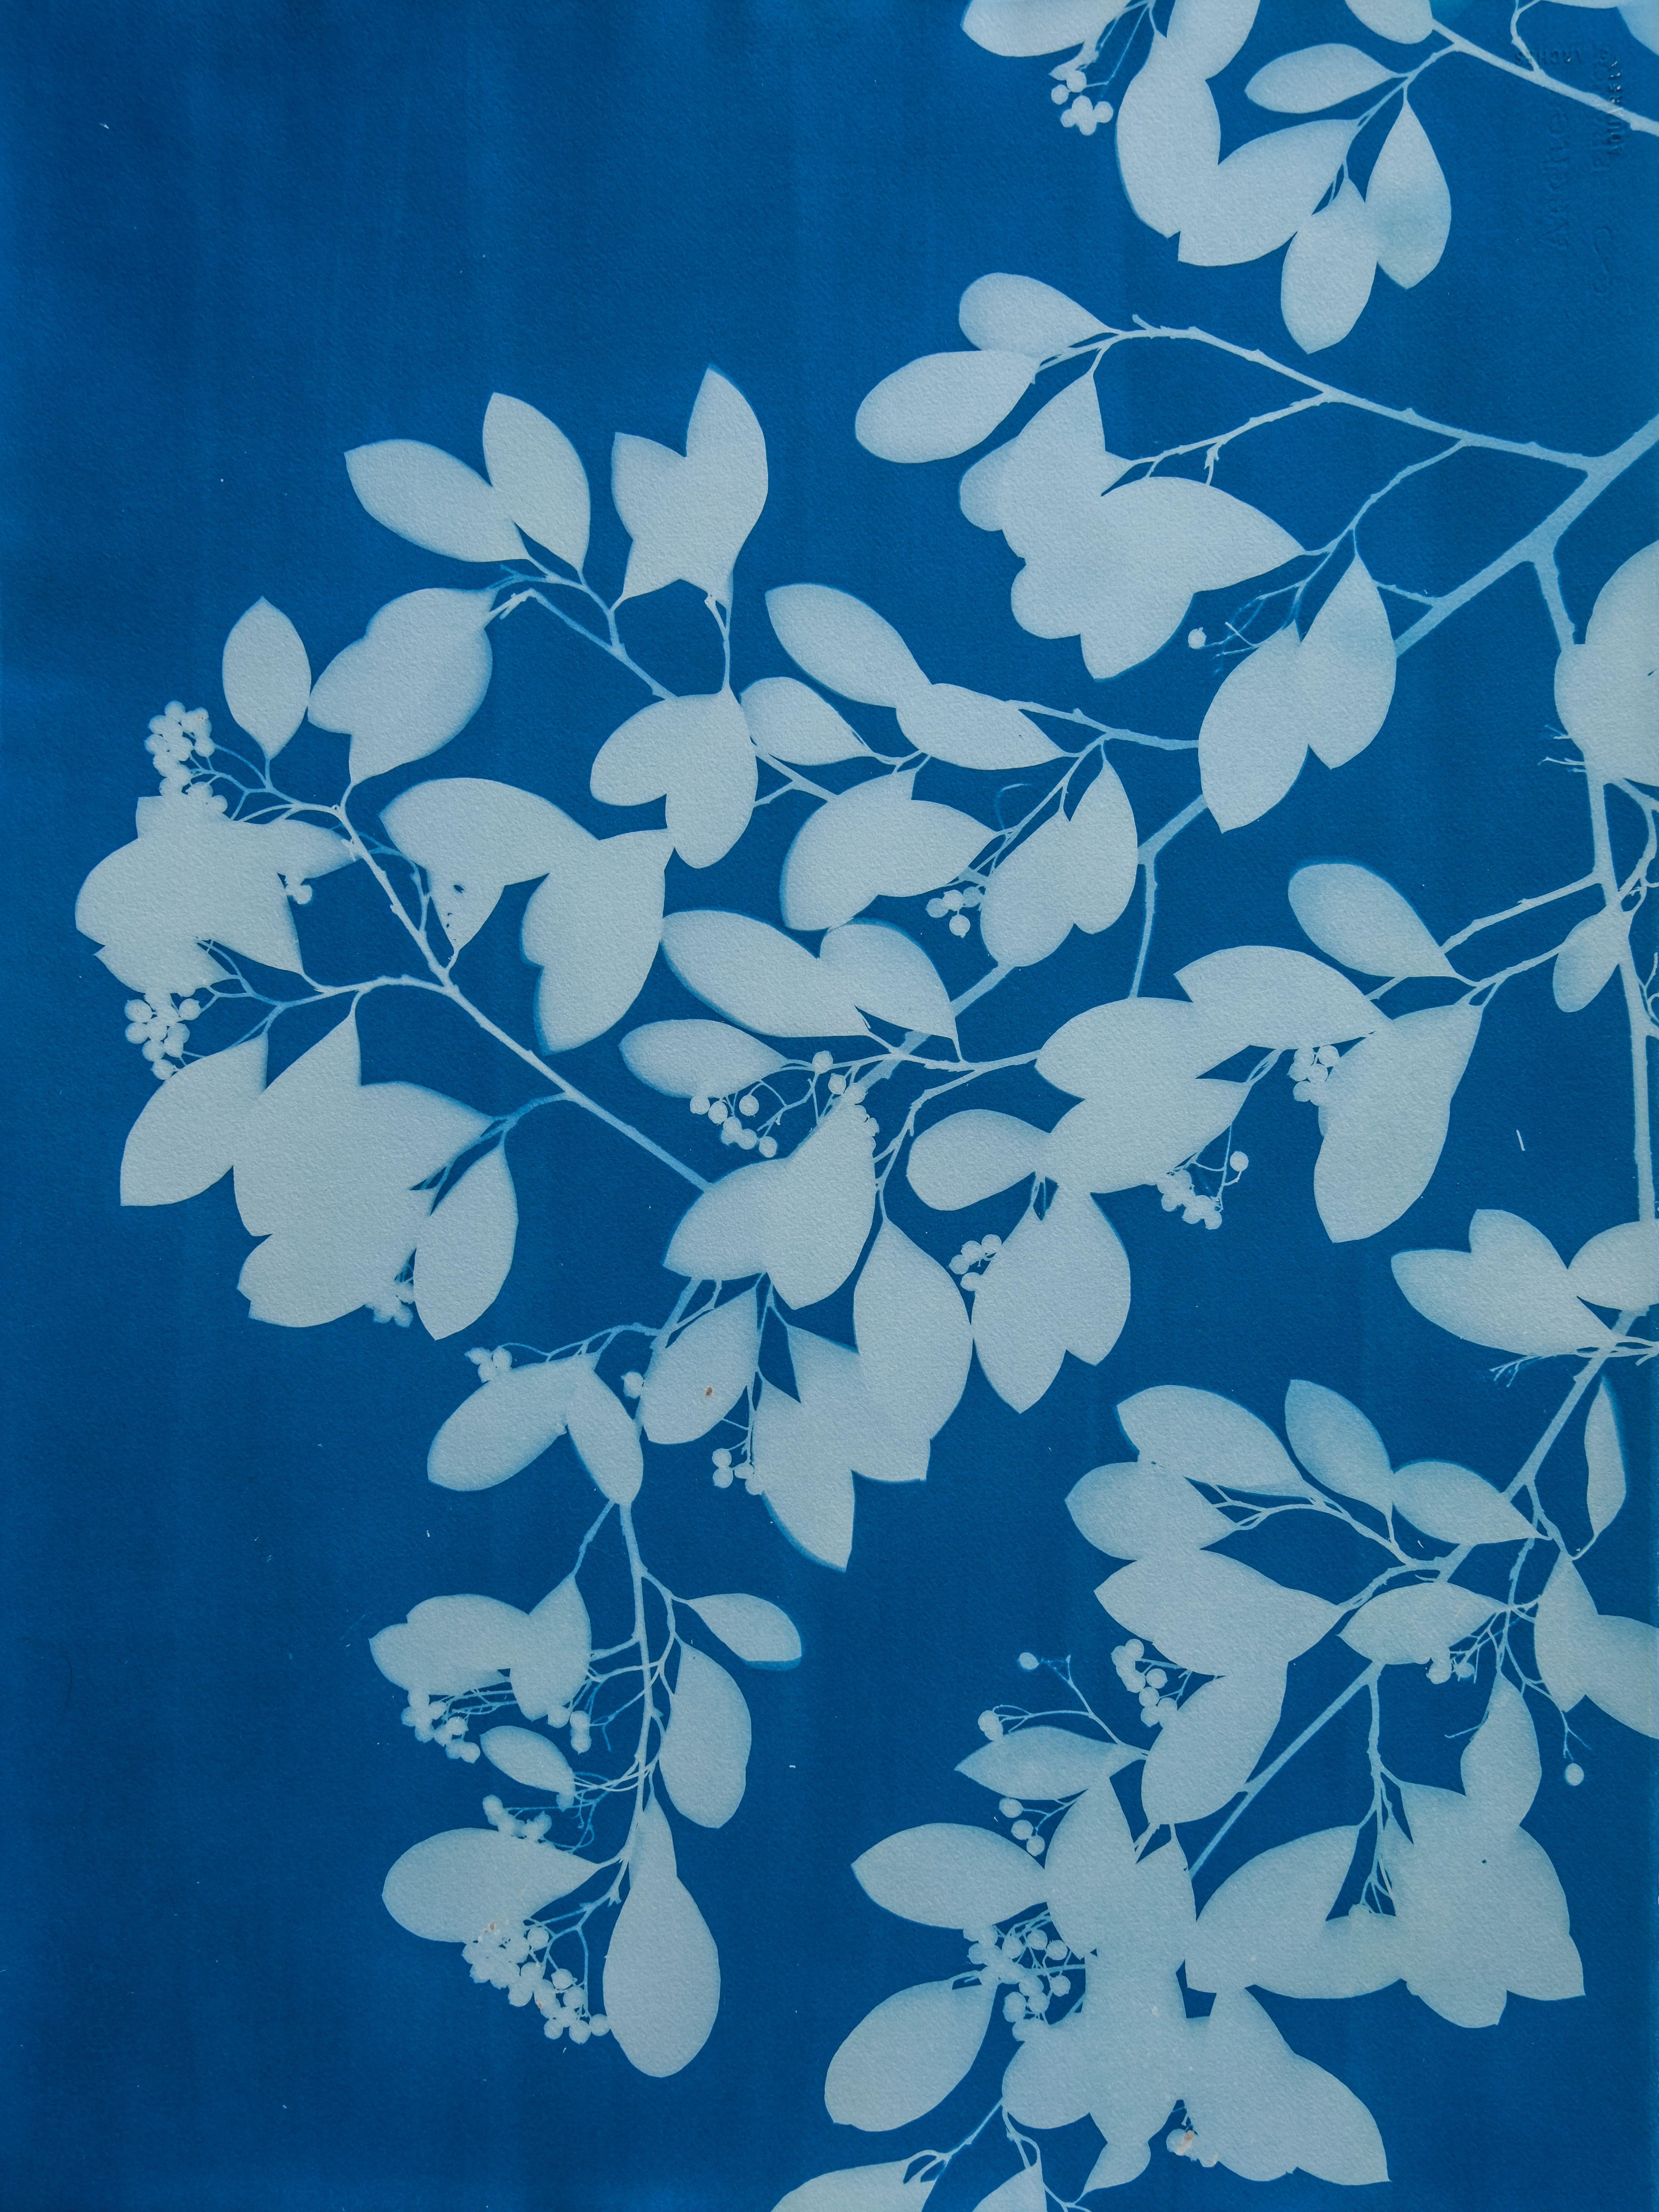 Spring Night Triptych (3 hand-printed botanical cyanotypes, 30 x 22 in. each) - Photograph by Christine So